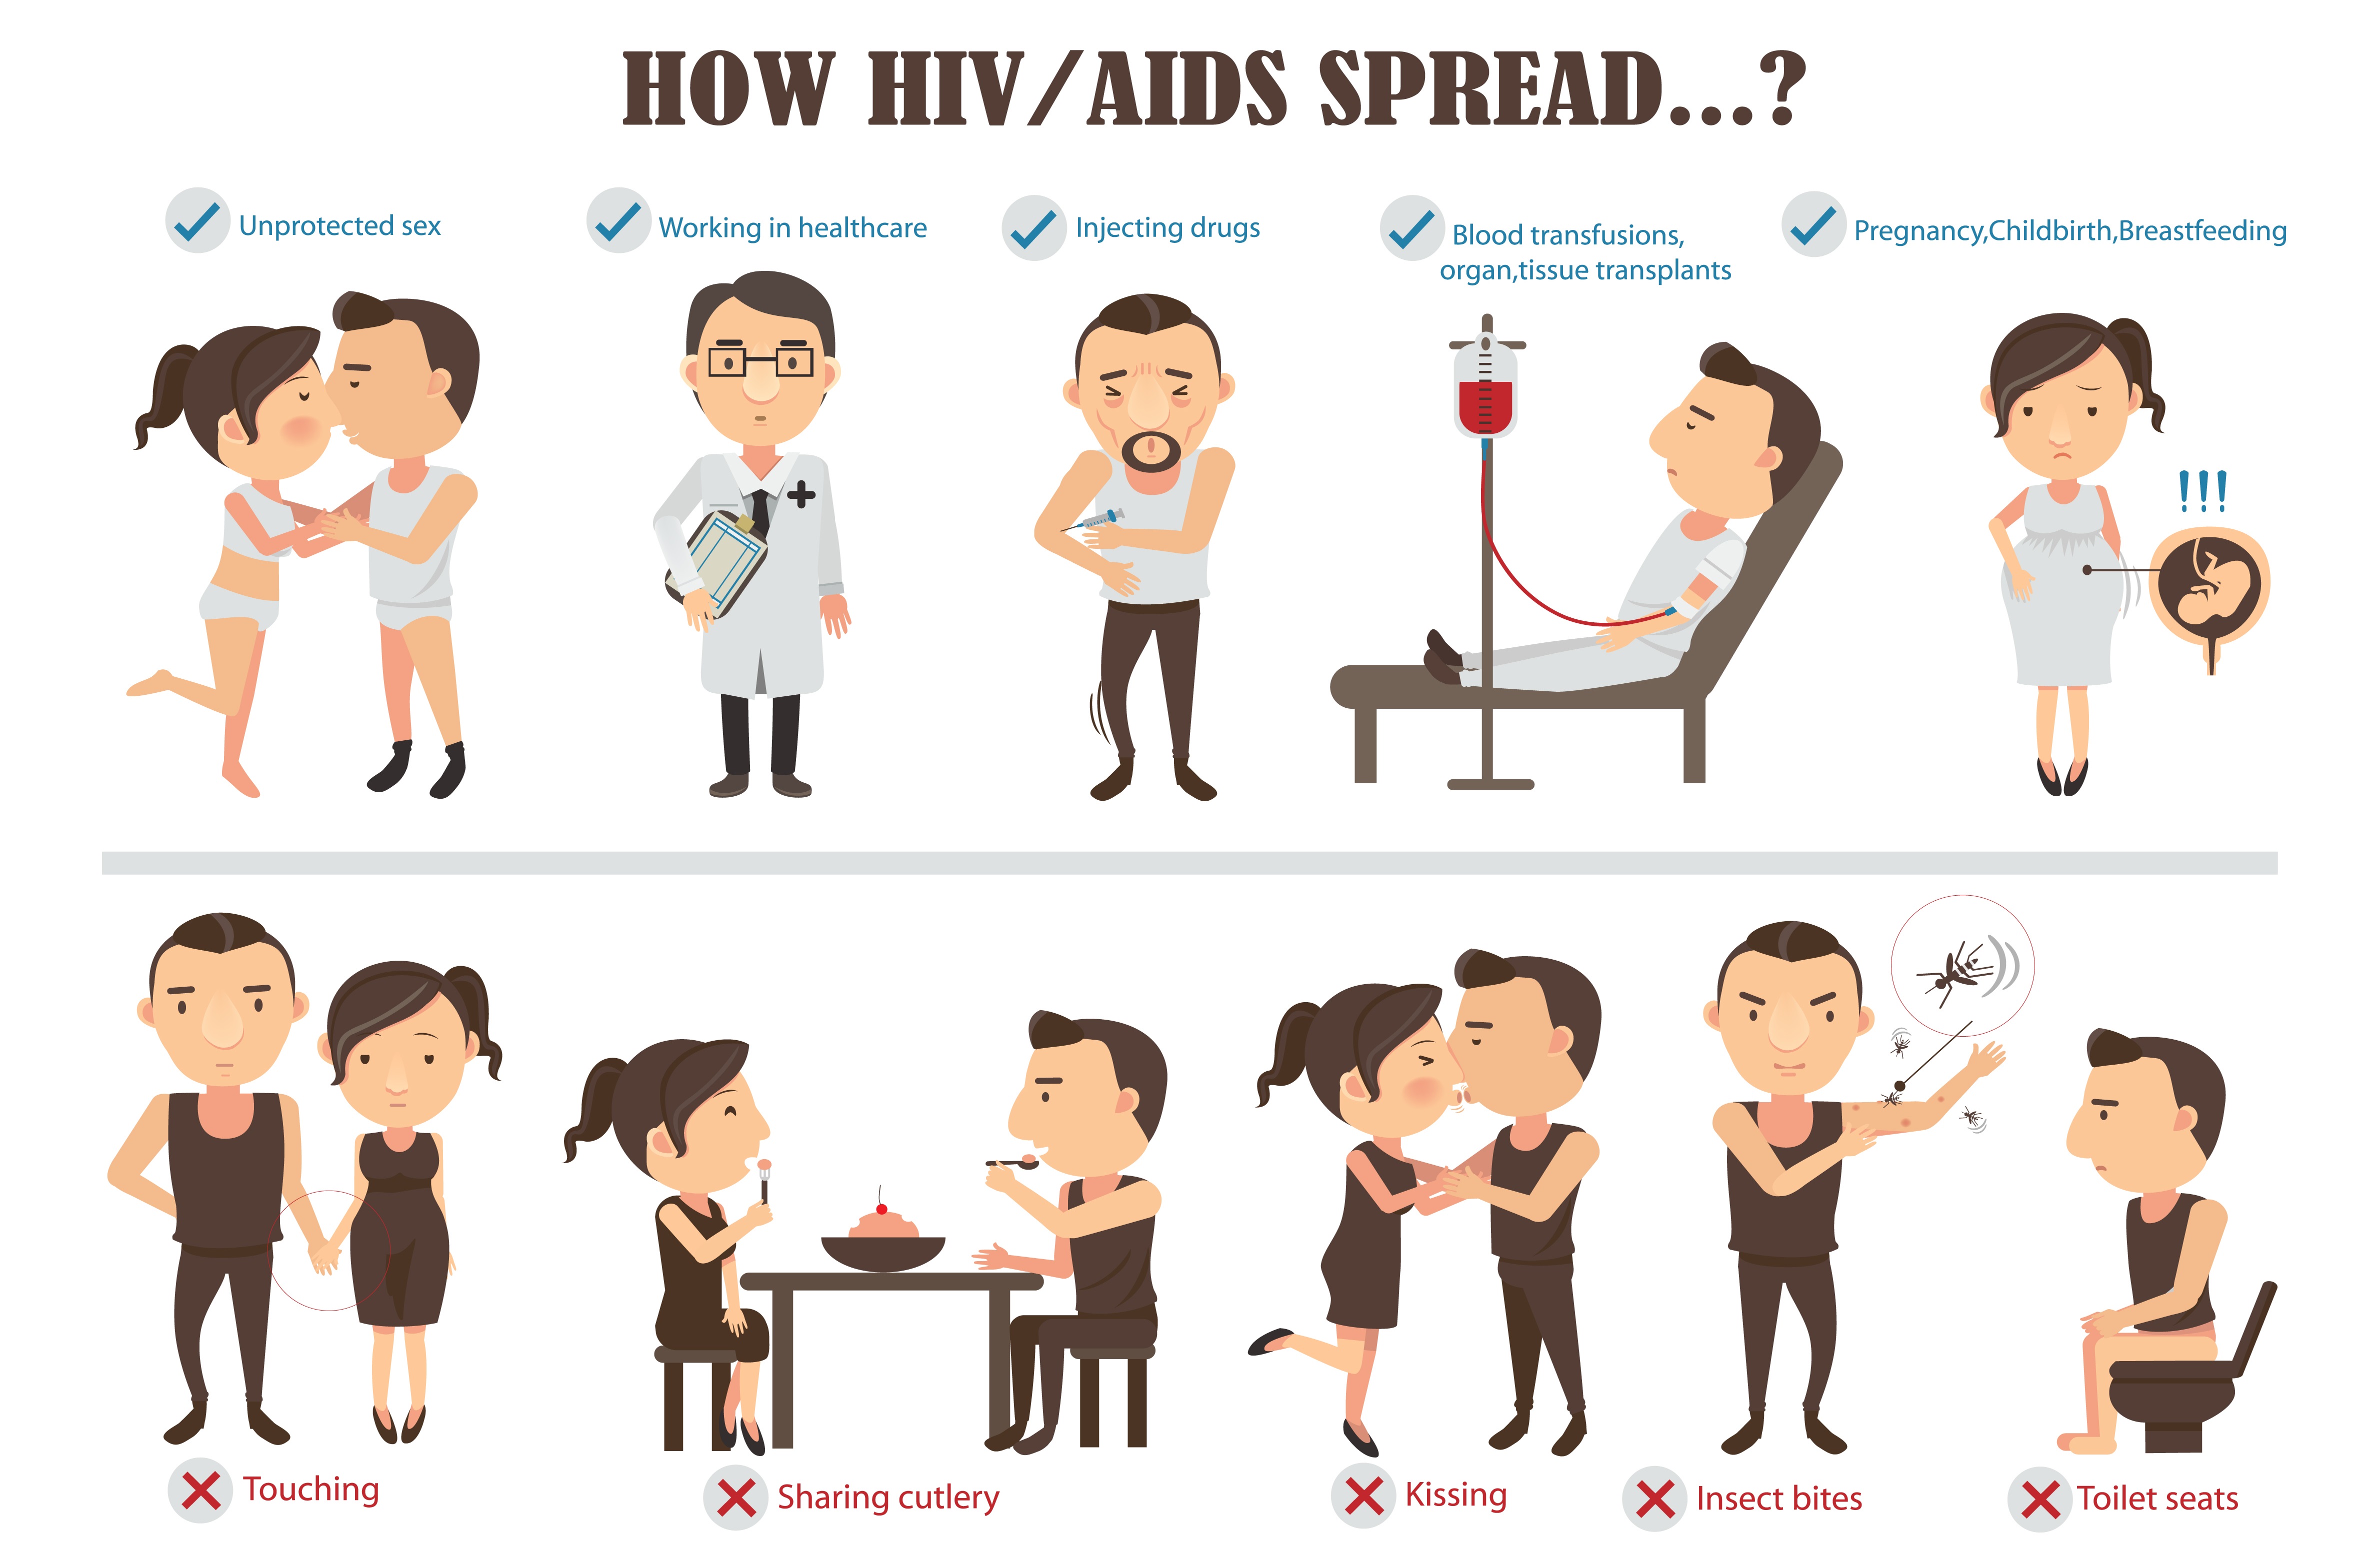 How HIV/AIDS spread